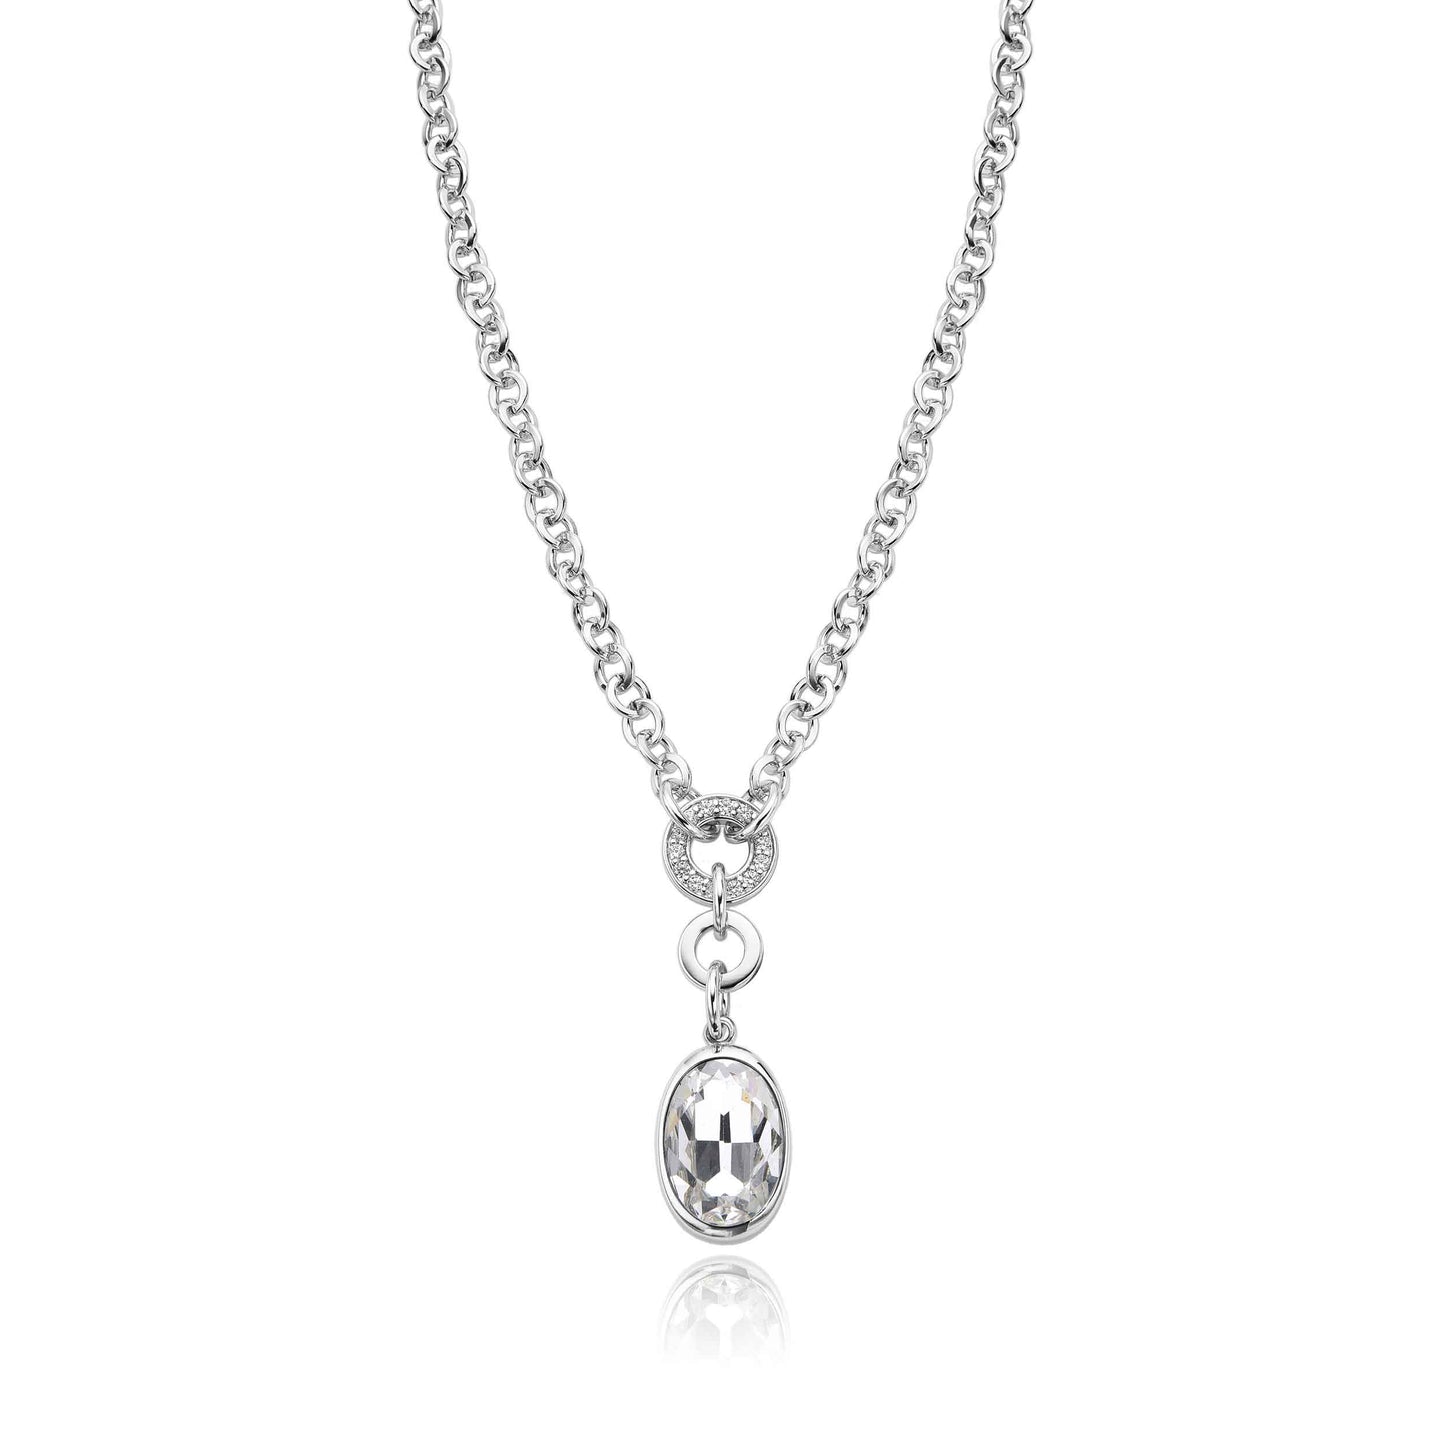 Rhodium Plated Necklace with Oval Clear Crystal Pendant